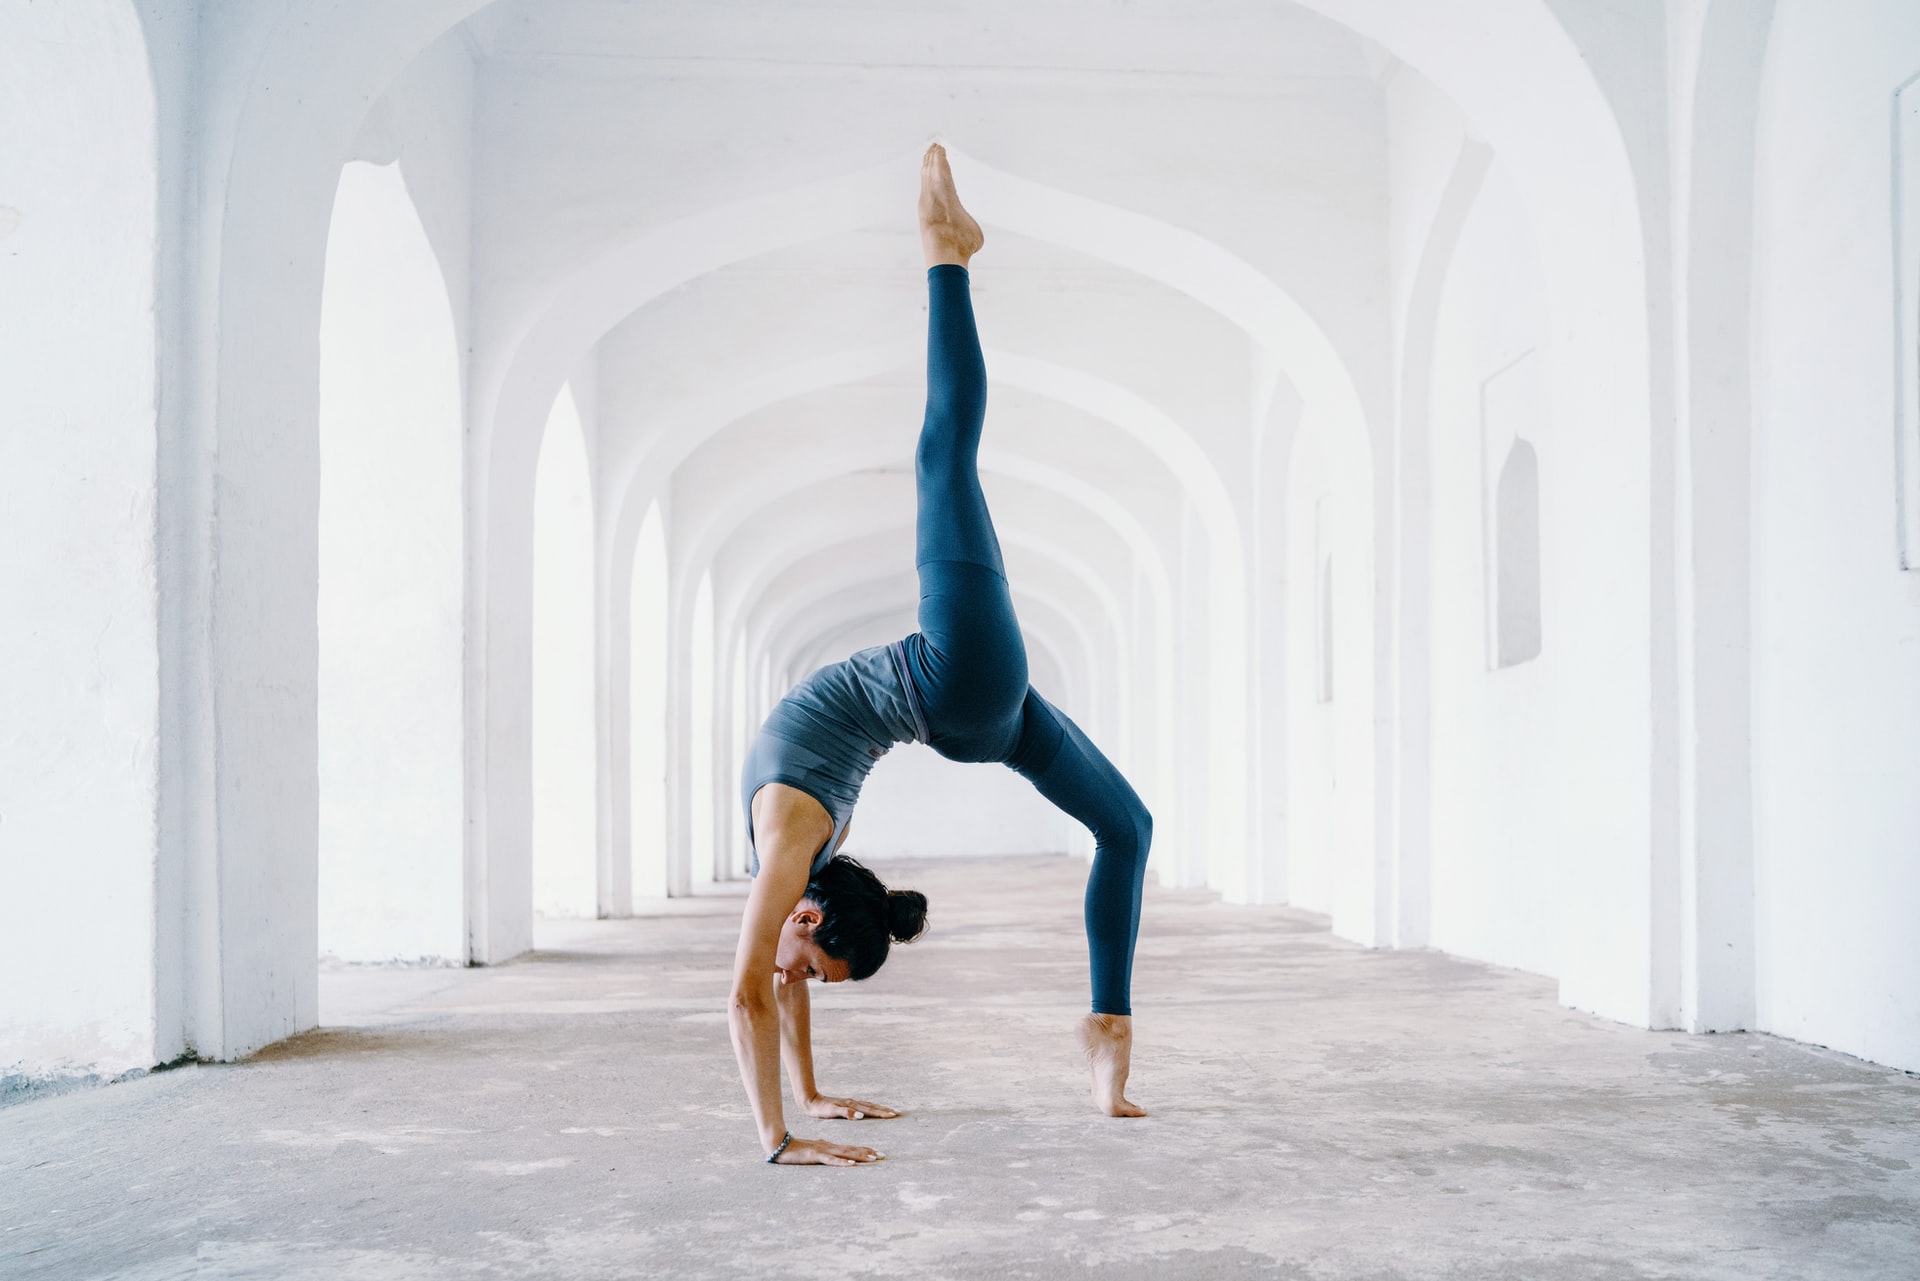 Yoga poses can help you strengthen your muscles and improve balance.